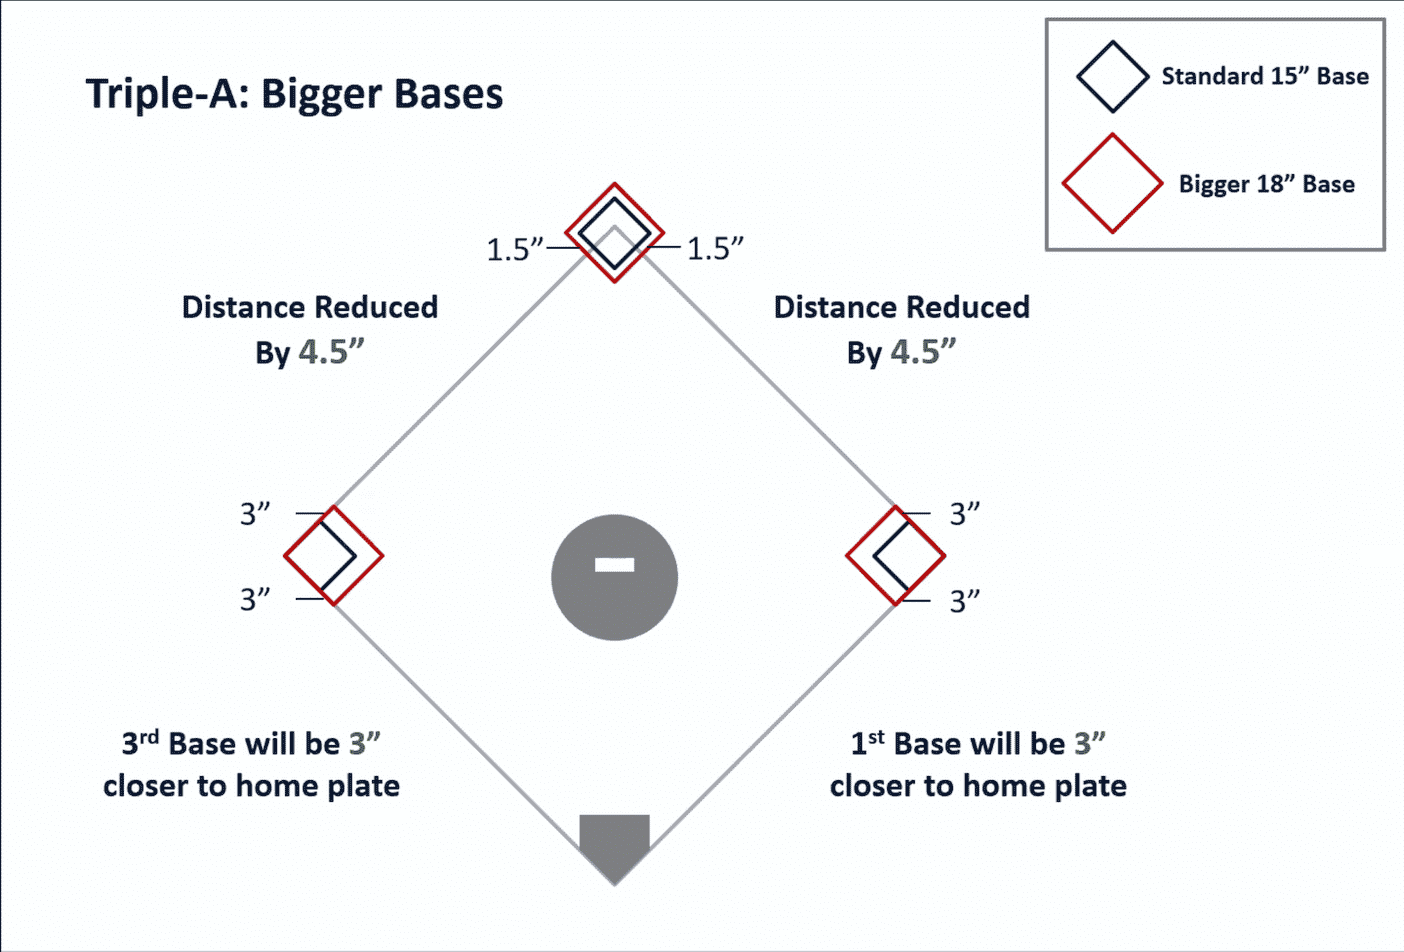 AAA Bases are Larger and Closer in 2021 Baseball Rules Academy